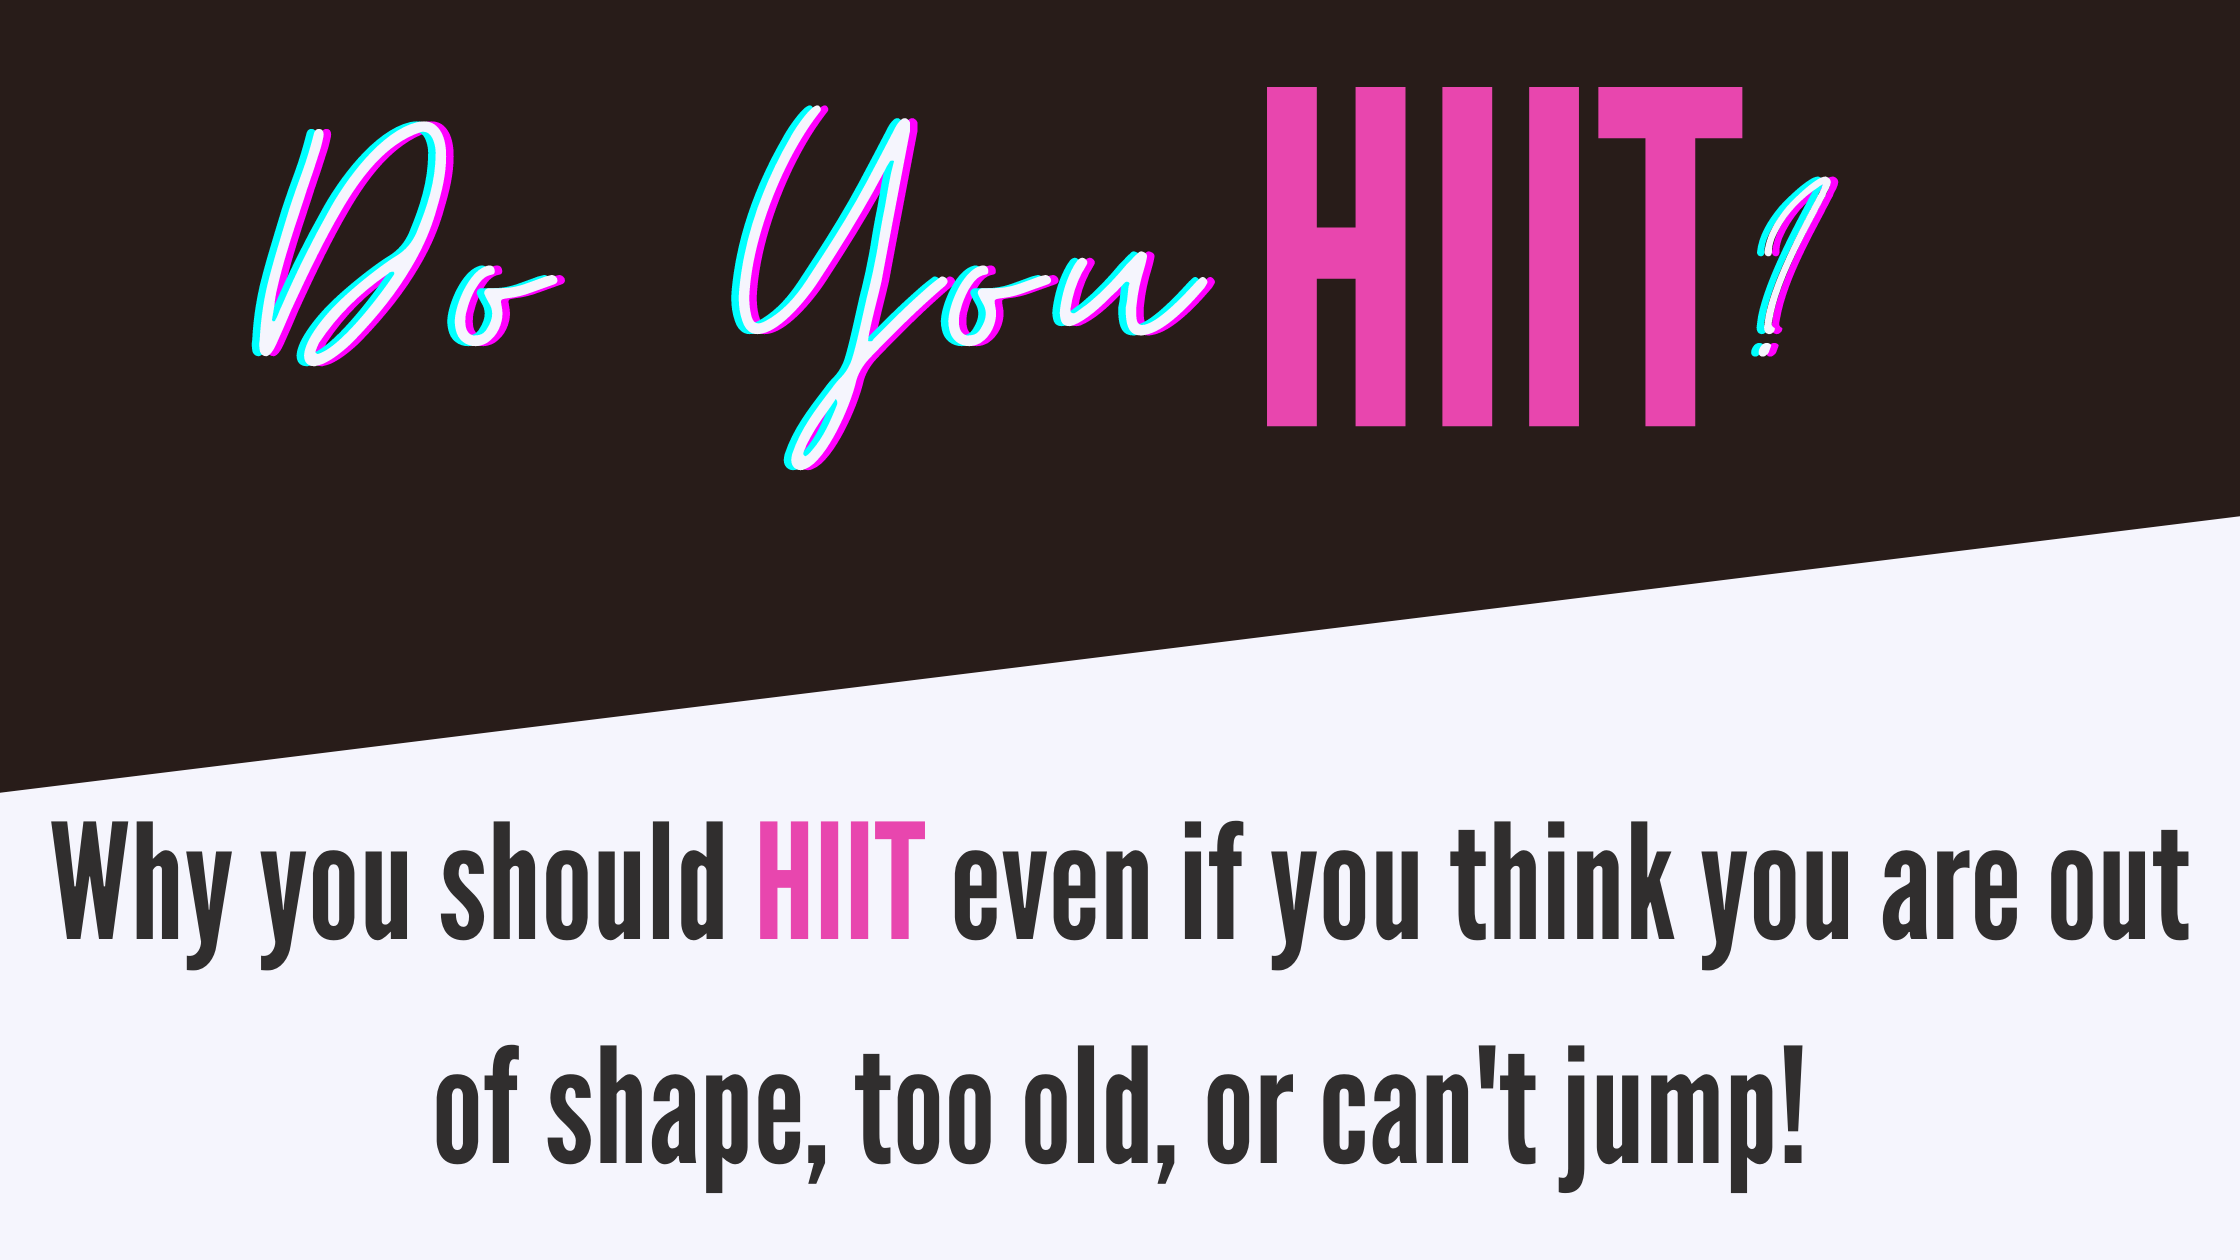 Is HIIT Good for Women? Why you should HIIT even if you think you are out of shape, too old, or can't jump!